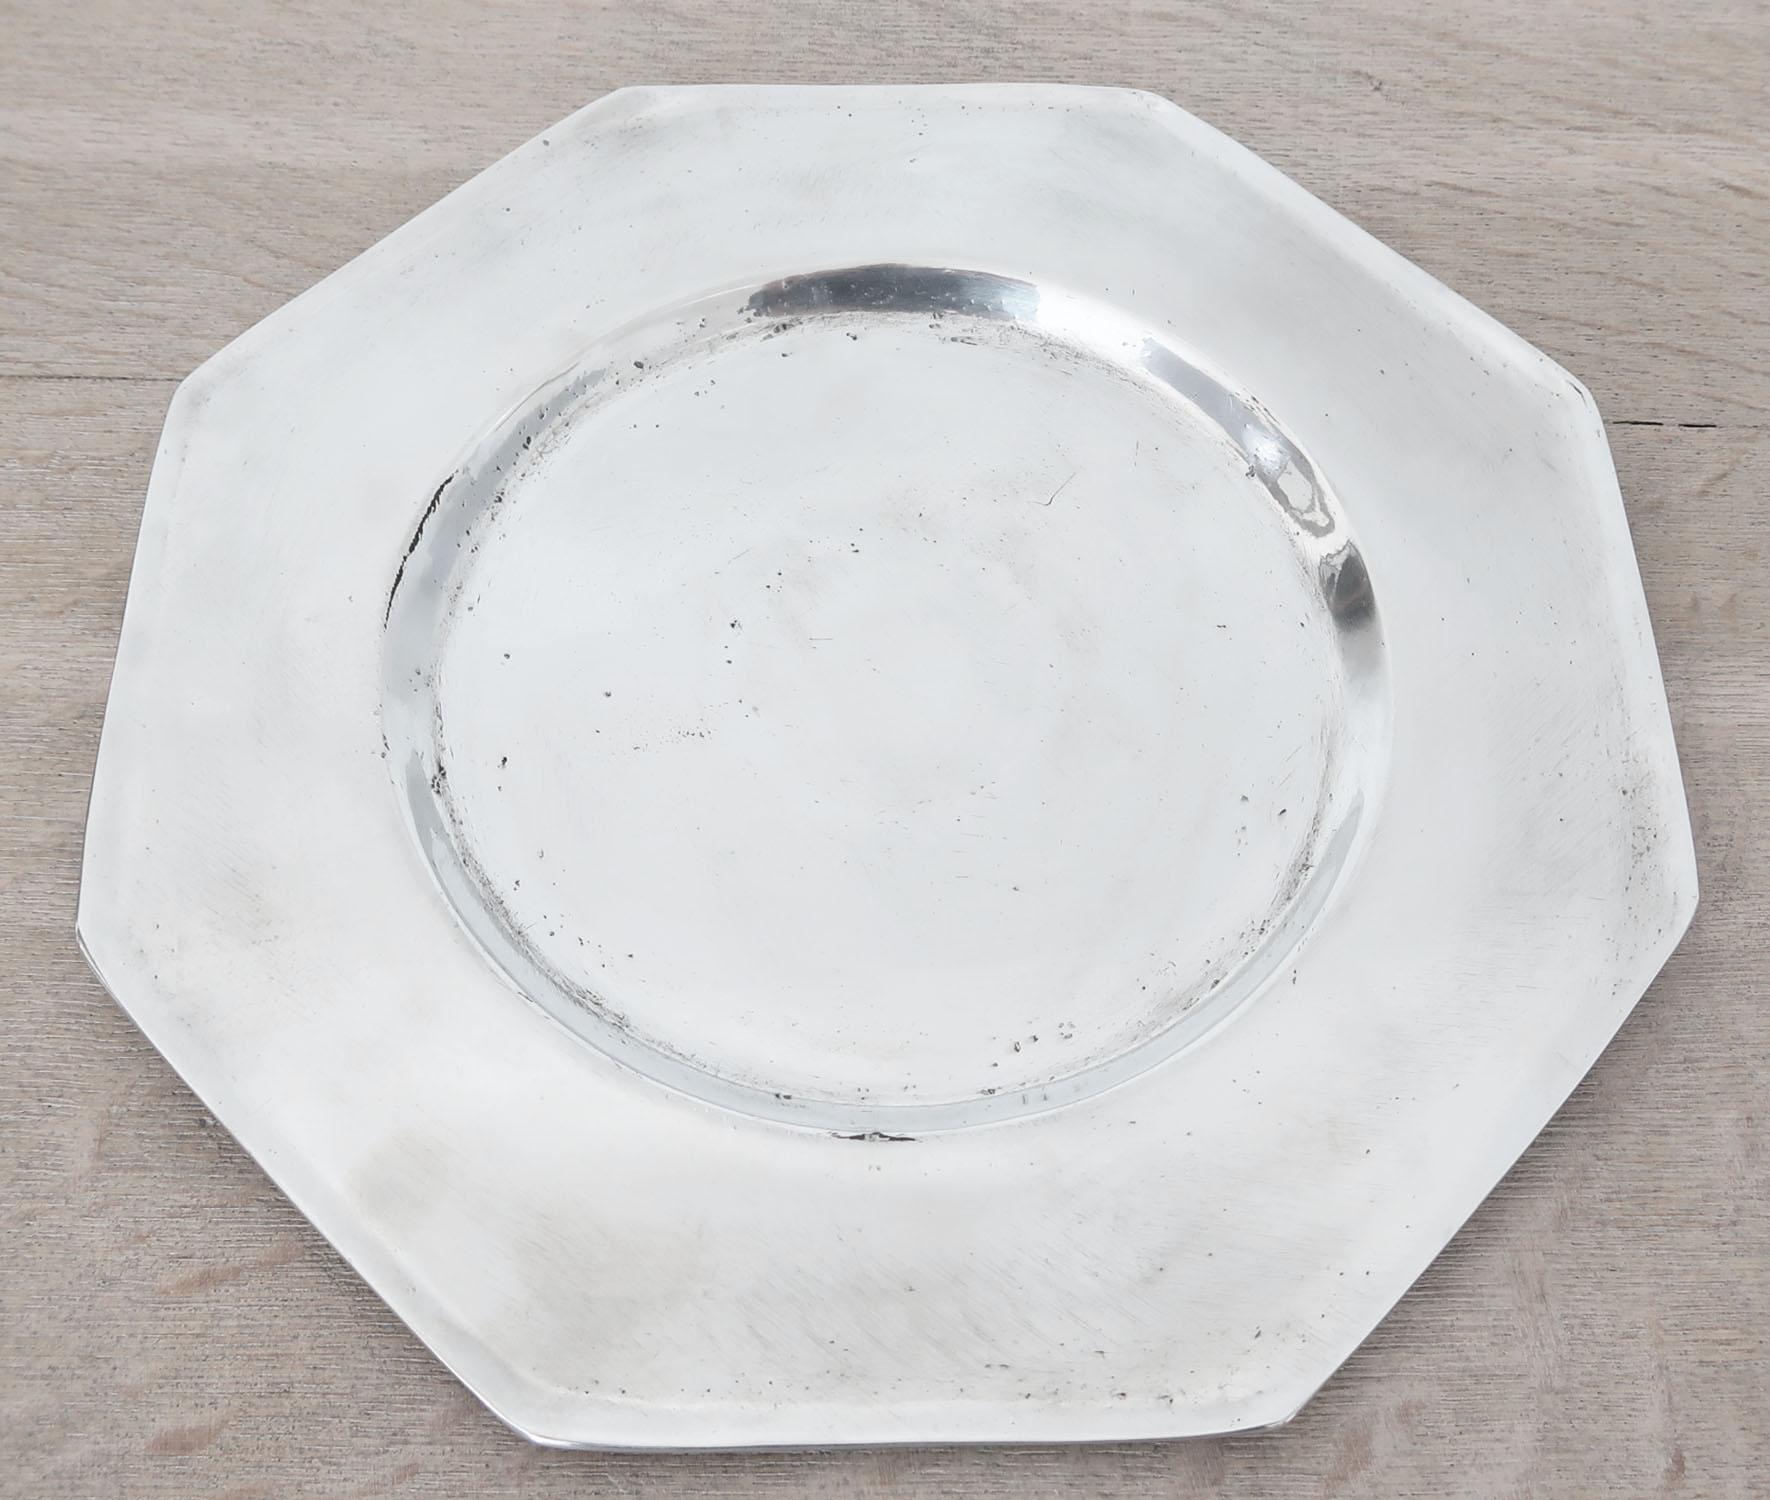 Georgian Antique Brightly Polished Pewter Octagonal Plate, 19th Century